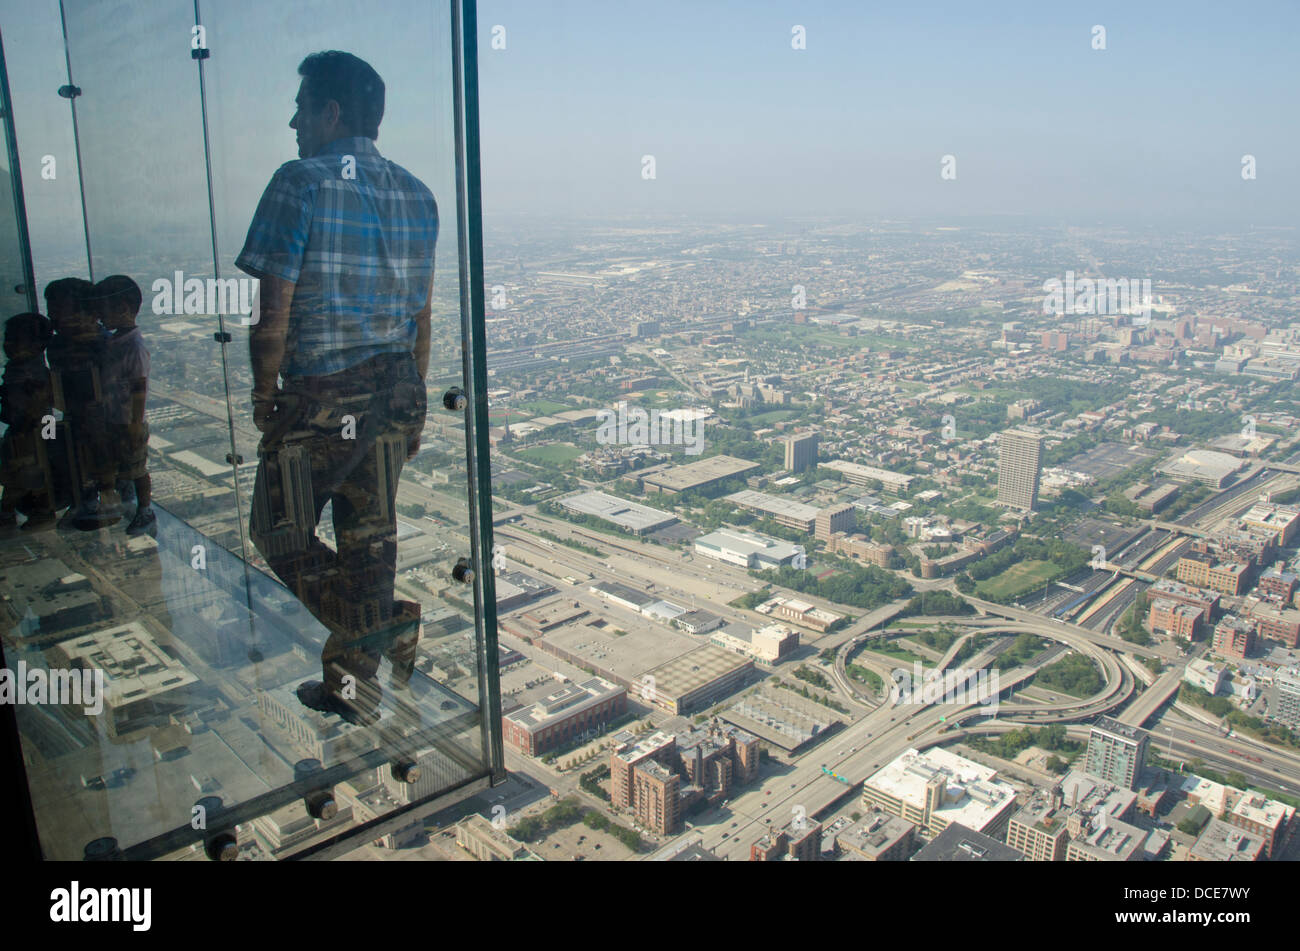 Illinois, Chicago, Willis Tower (aka Sears Tower). Tourists out on the 'Ledge' on Sky Deck Chicago, 103 floors up. Stock Photo